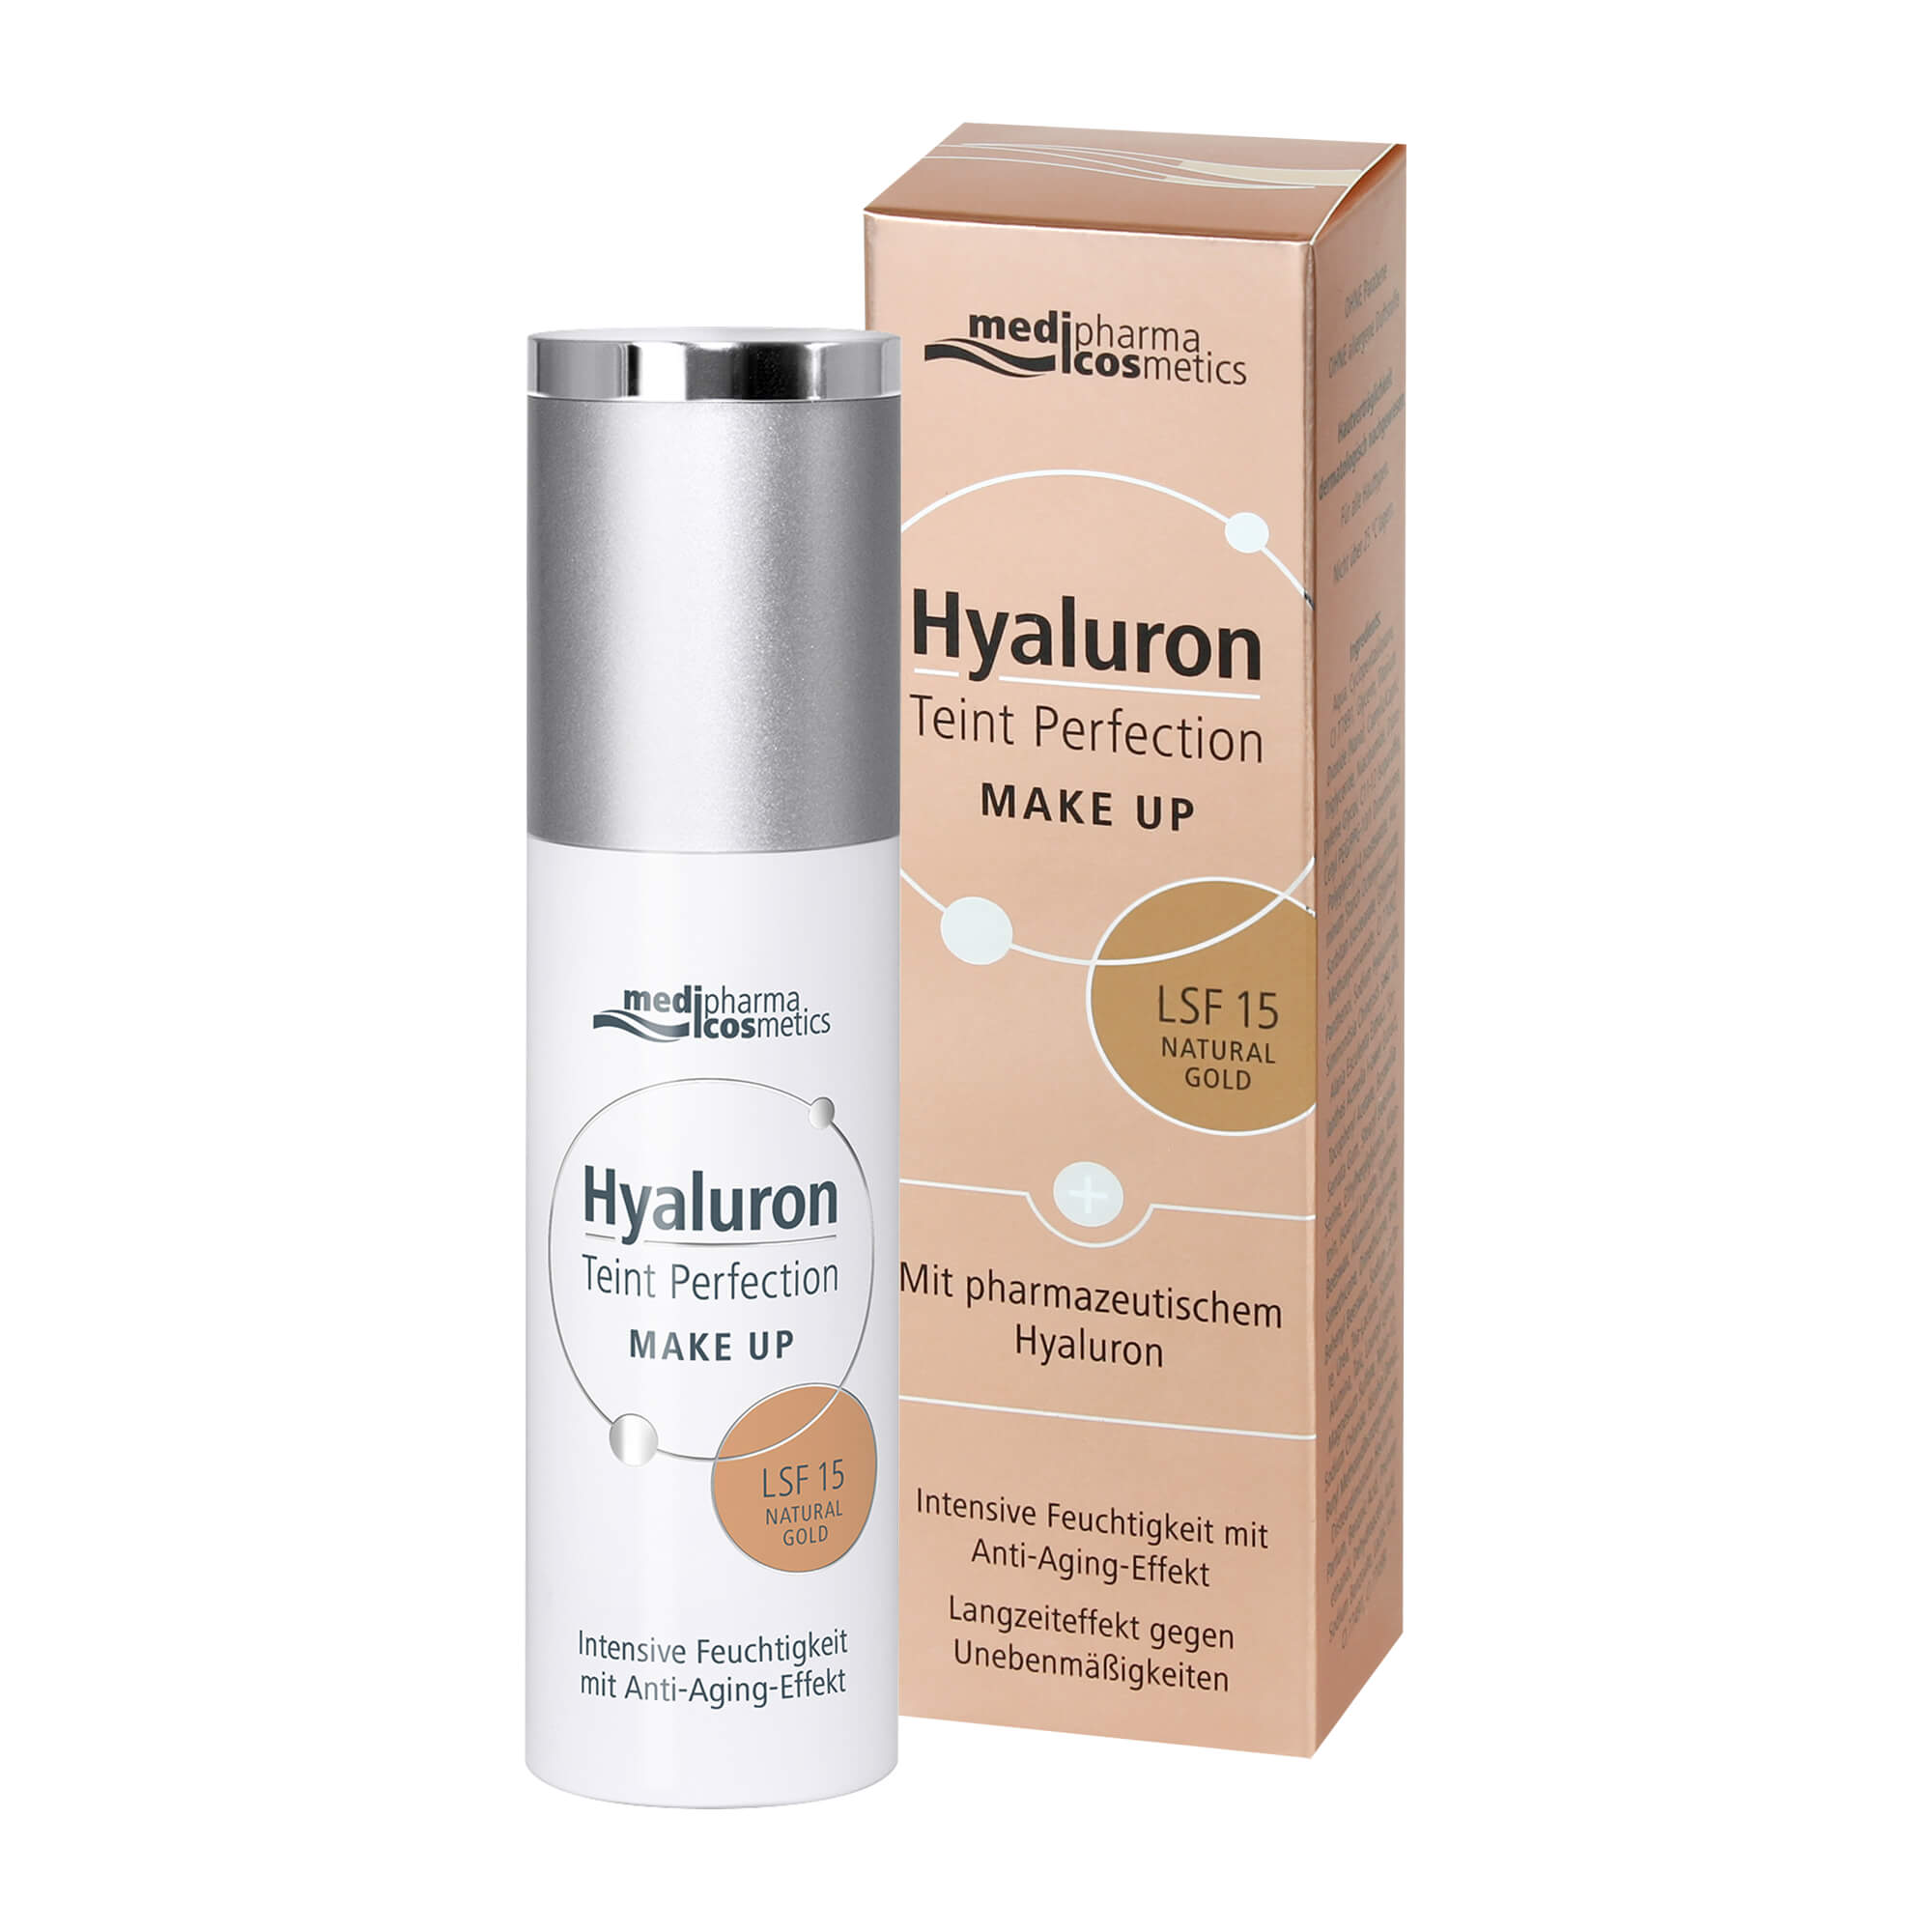 Hyaluron Teint Perfection Make-up Natural Gold mit LSF15